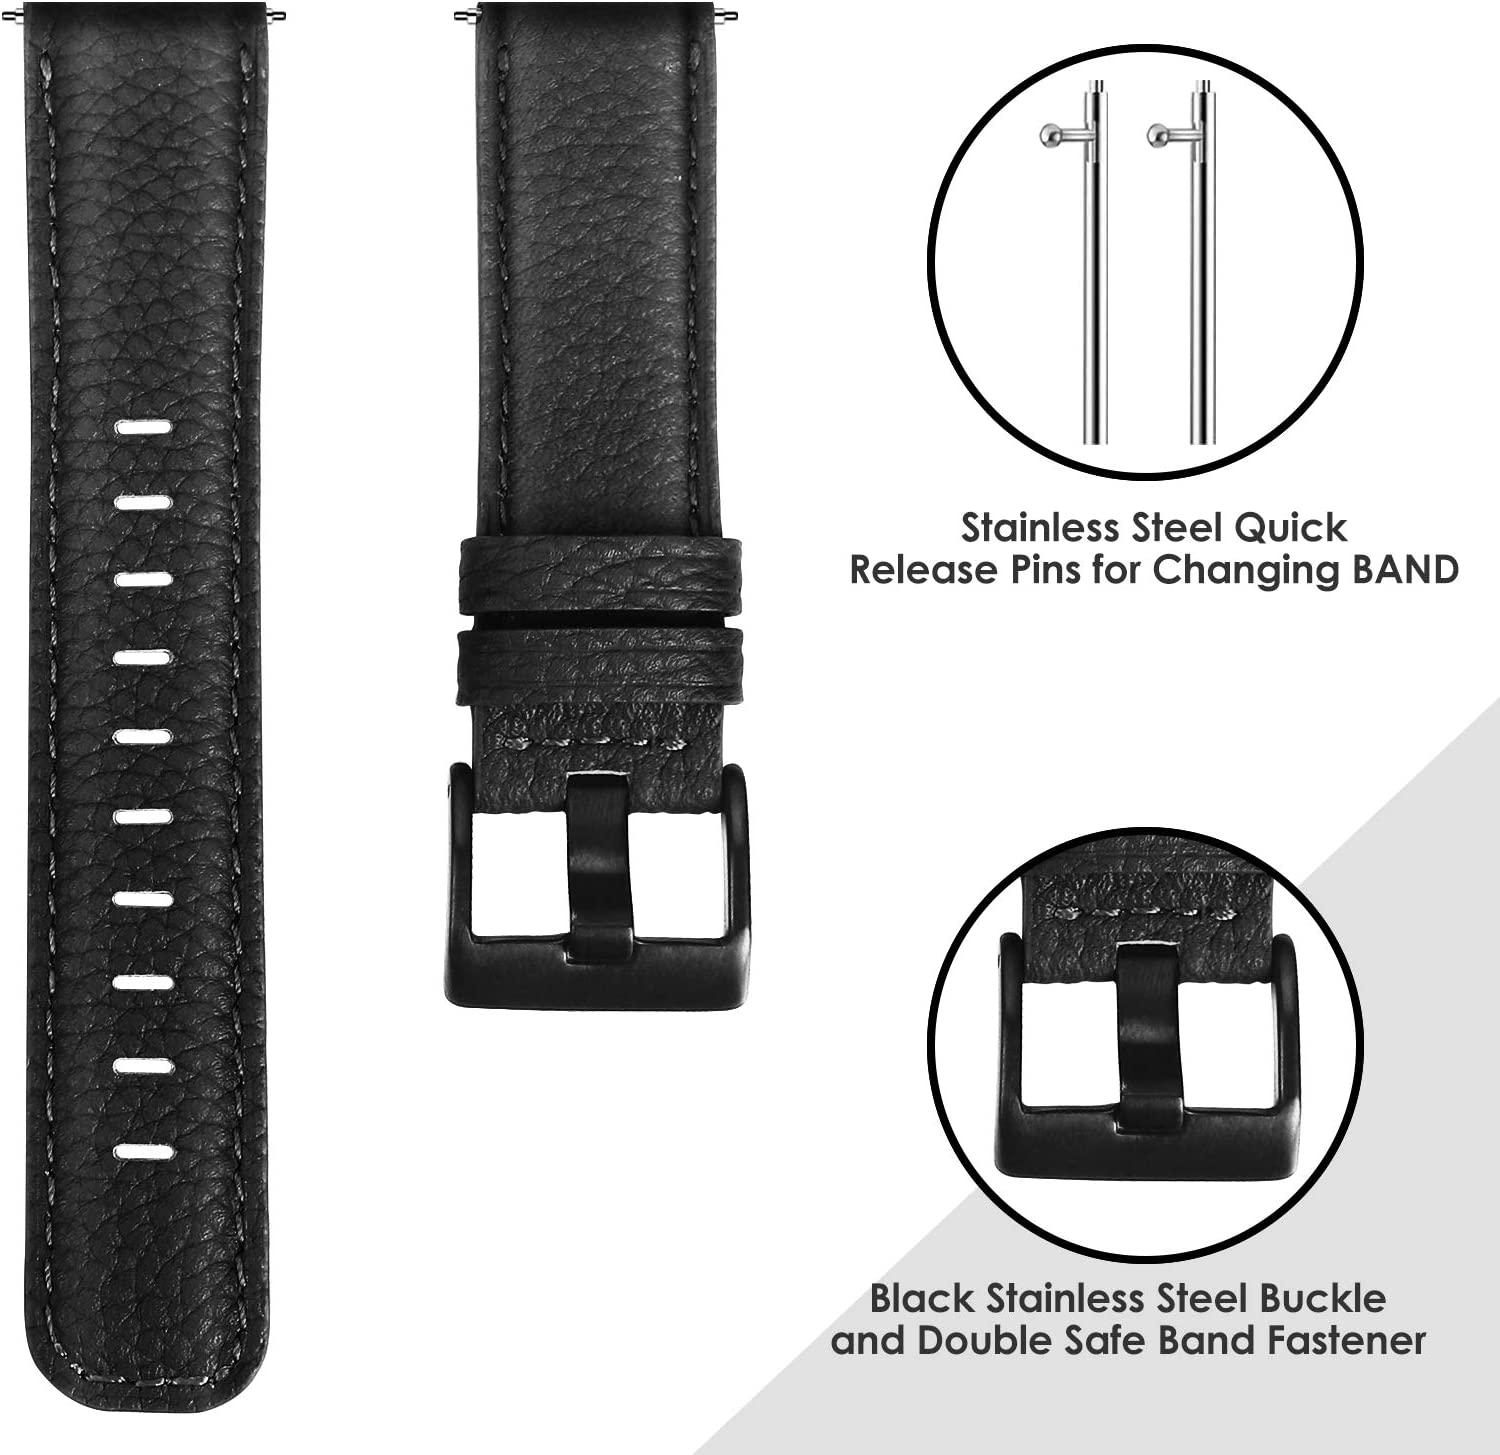 For Fitbit Versa 2/Fitbit Versa/Versa Lite/Versa SE Bands, Classic  Replacement Bands with stainless steel buckle high quality elastomer  Accessories